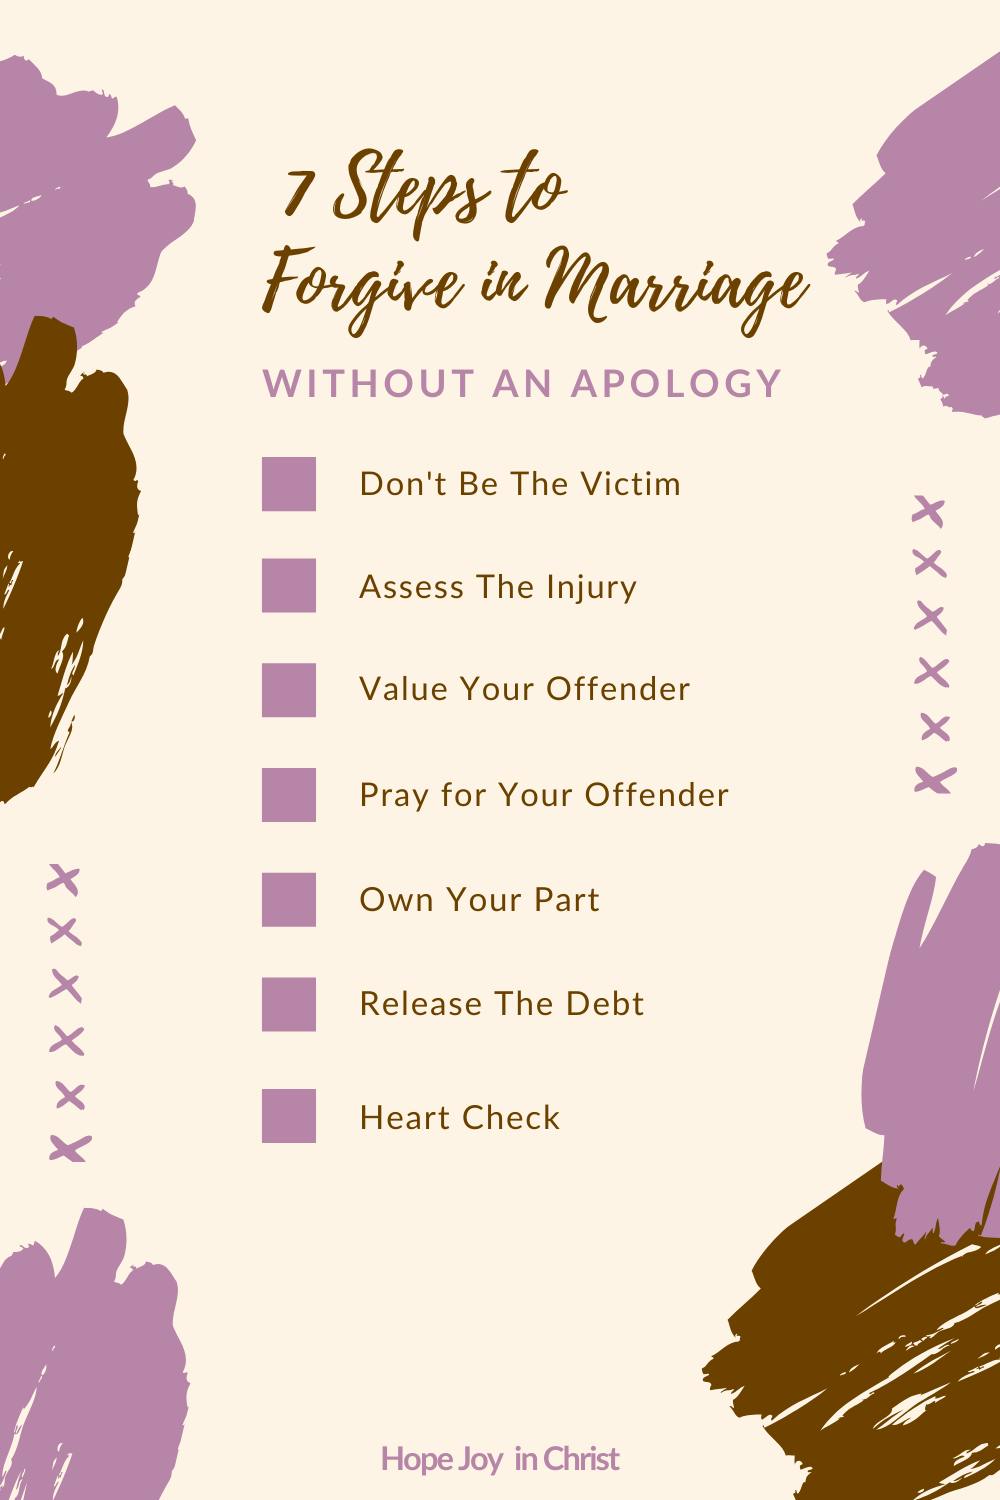 How To Forgive In Marriage